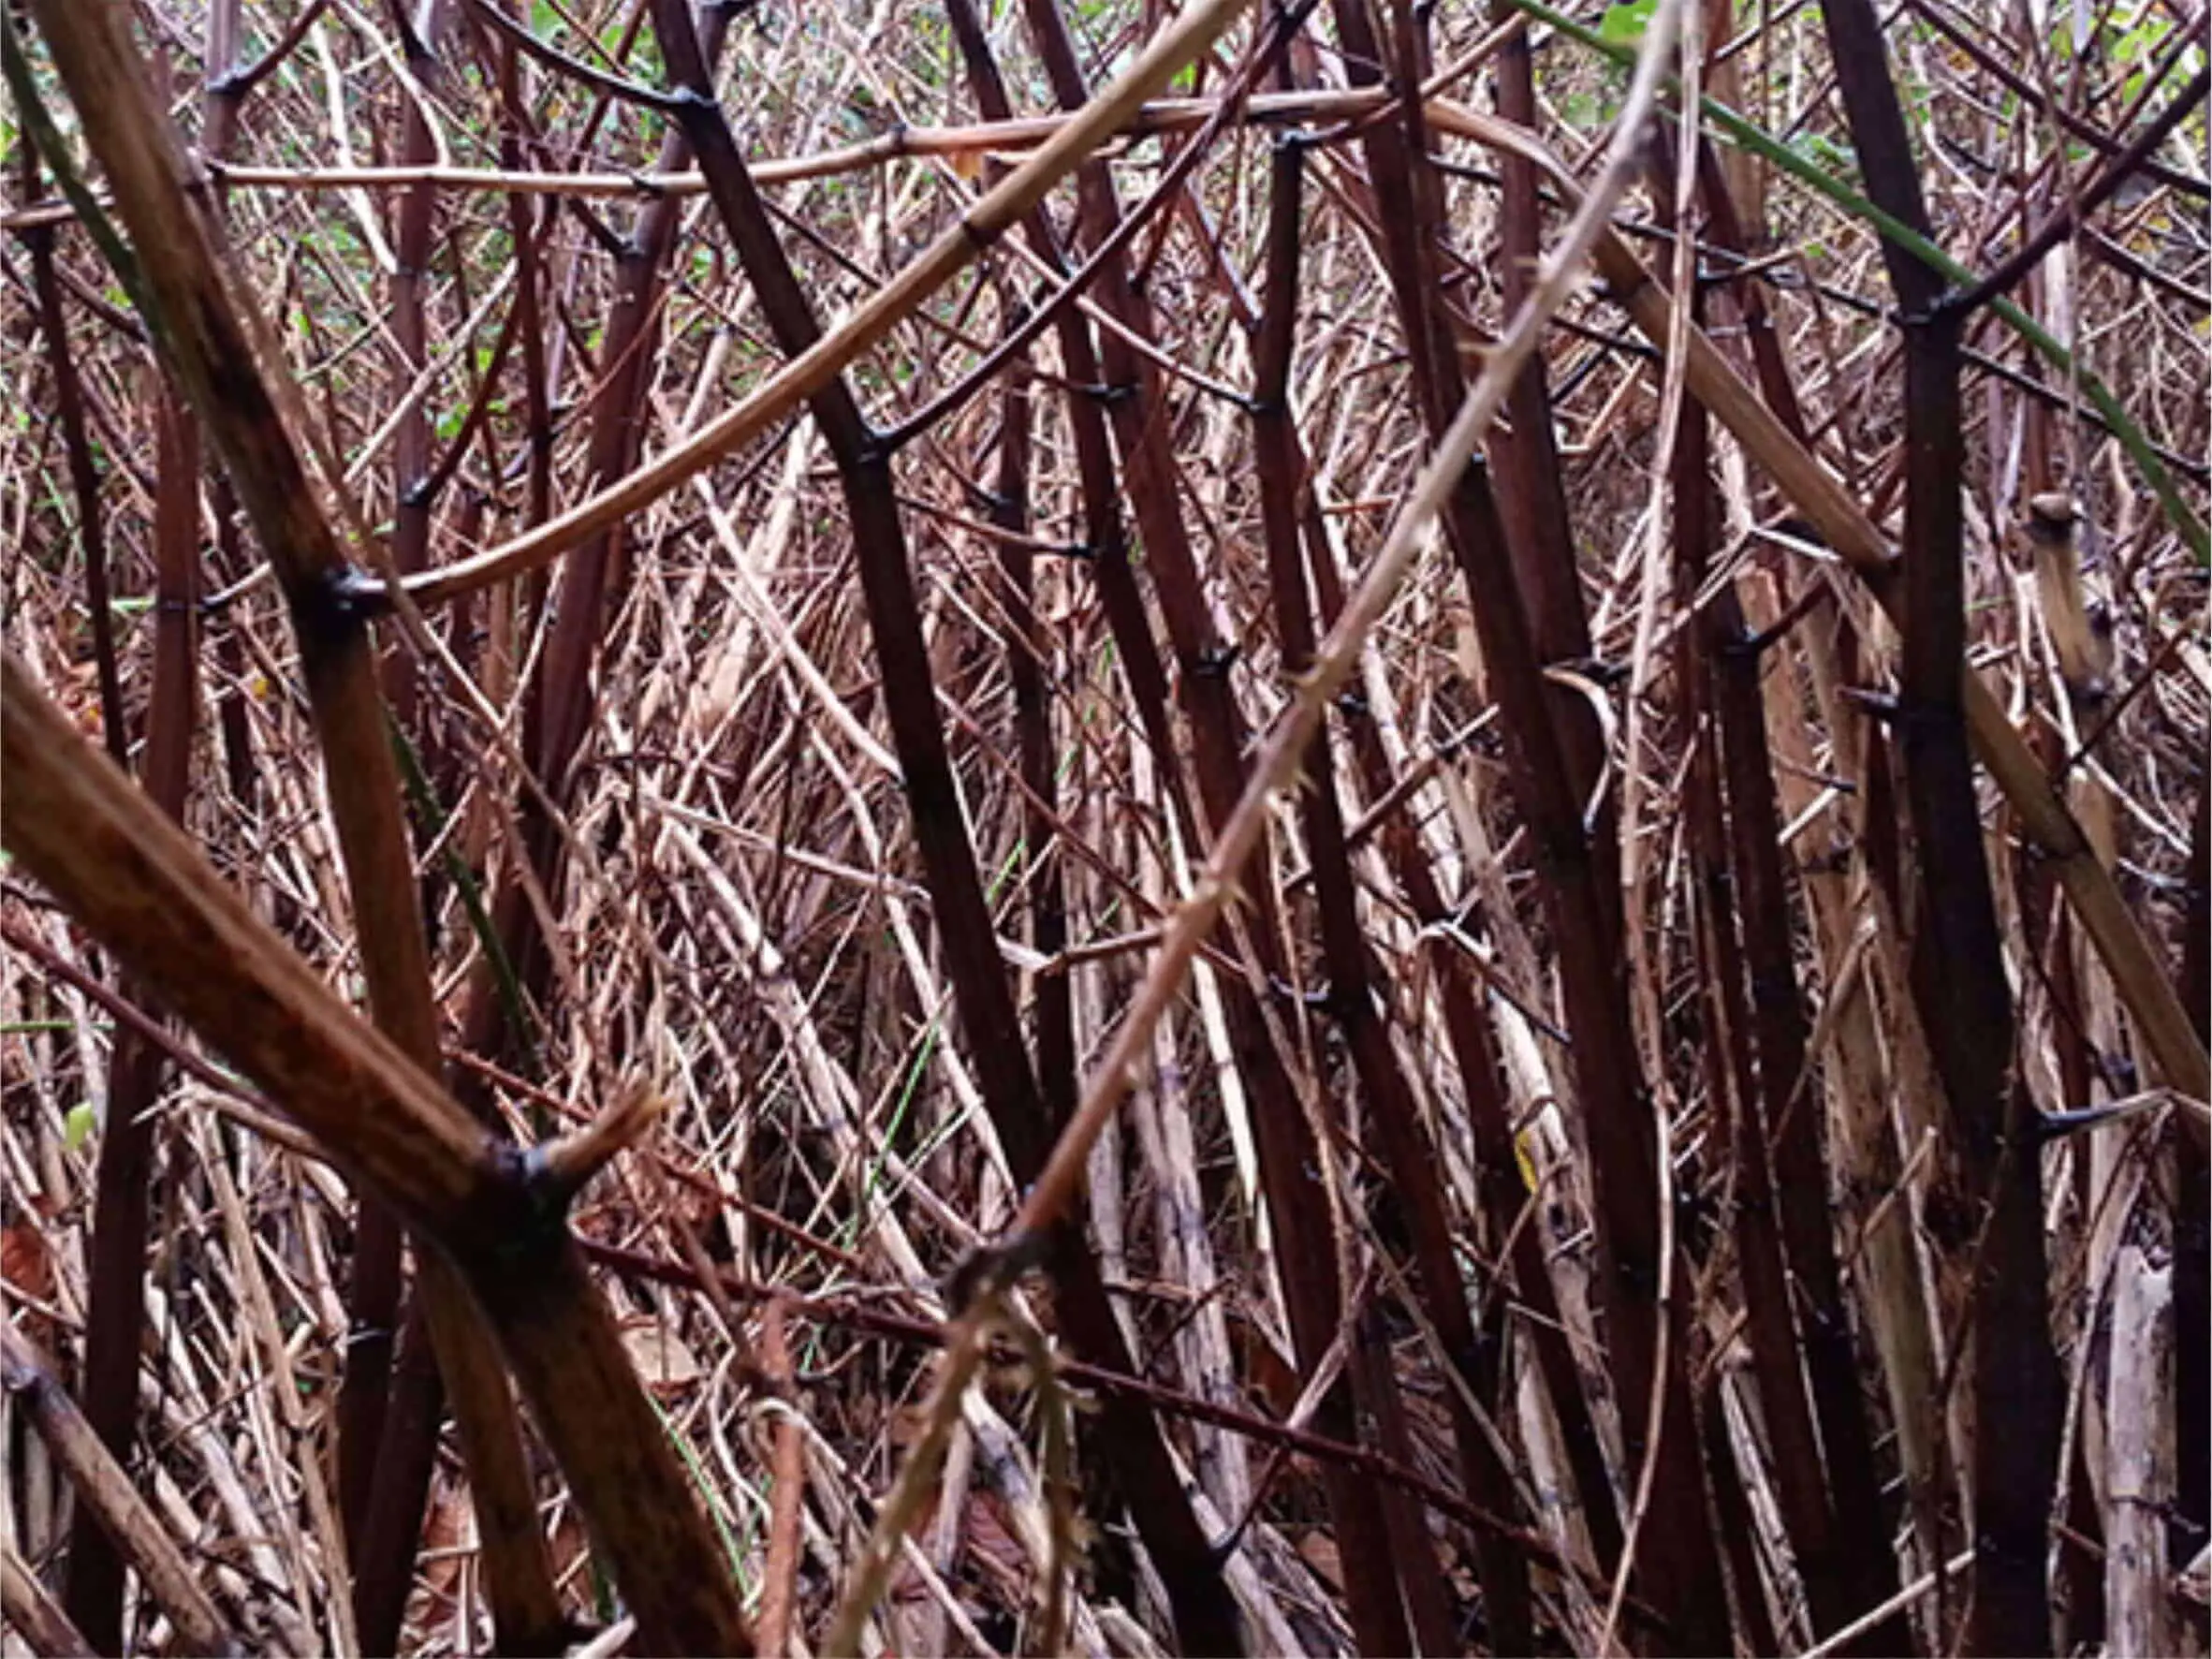 Japanese Knotweed stems dying and turning brown in Winter